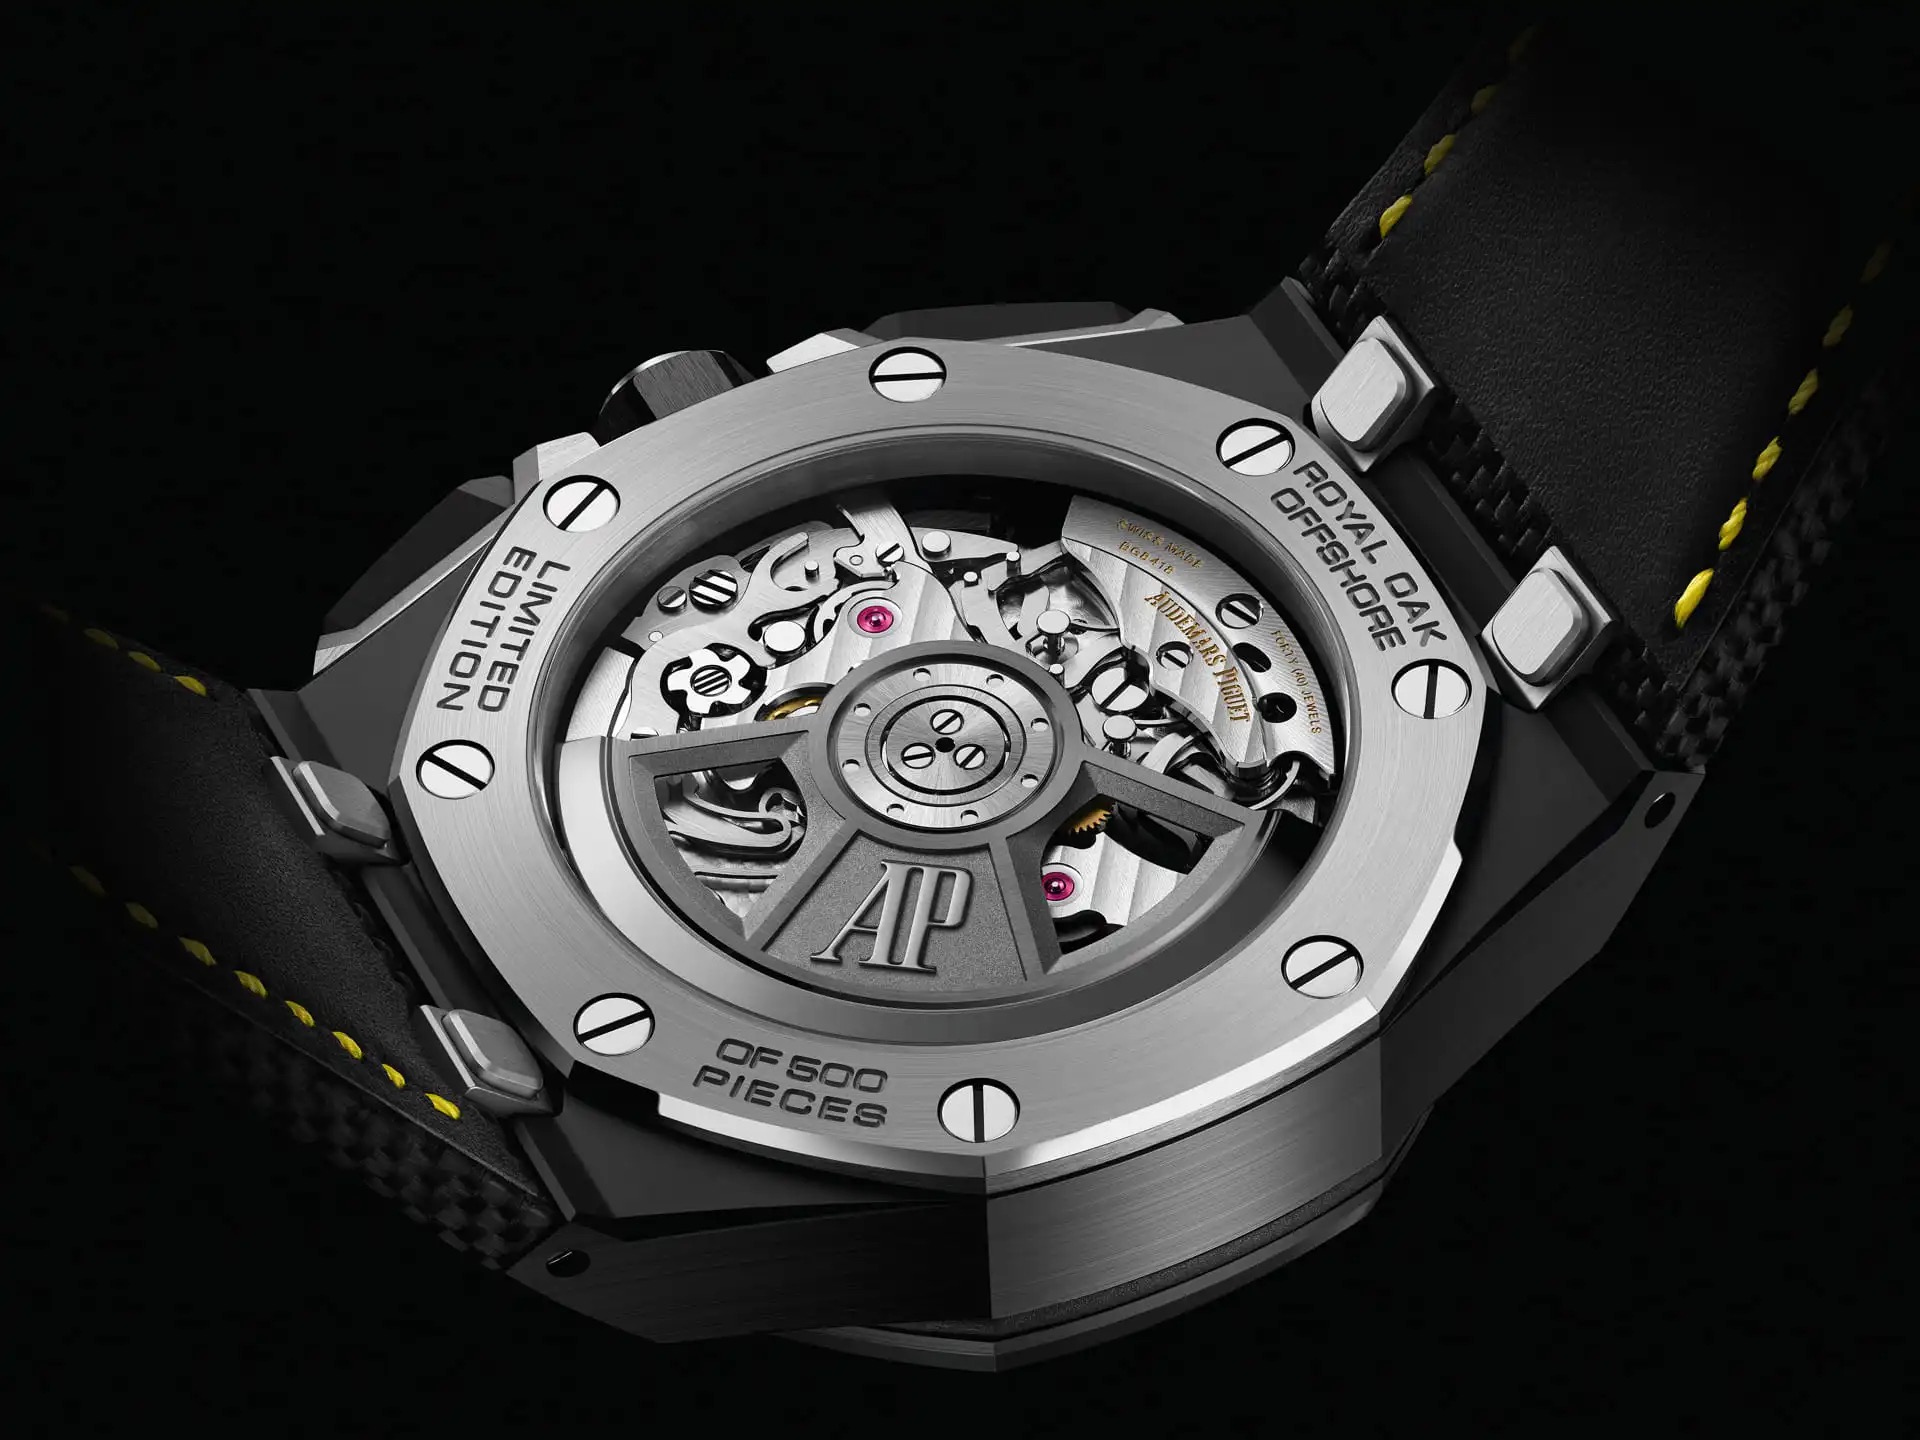 Audemars Piguet Royal Oak Offshore End Of Days Tribute 26420CE.OO.A005VE.01 Trasera